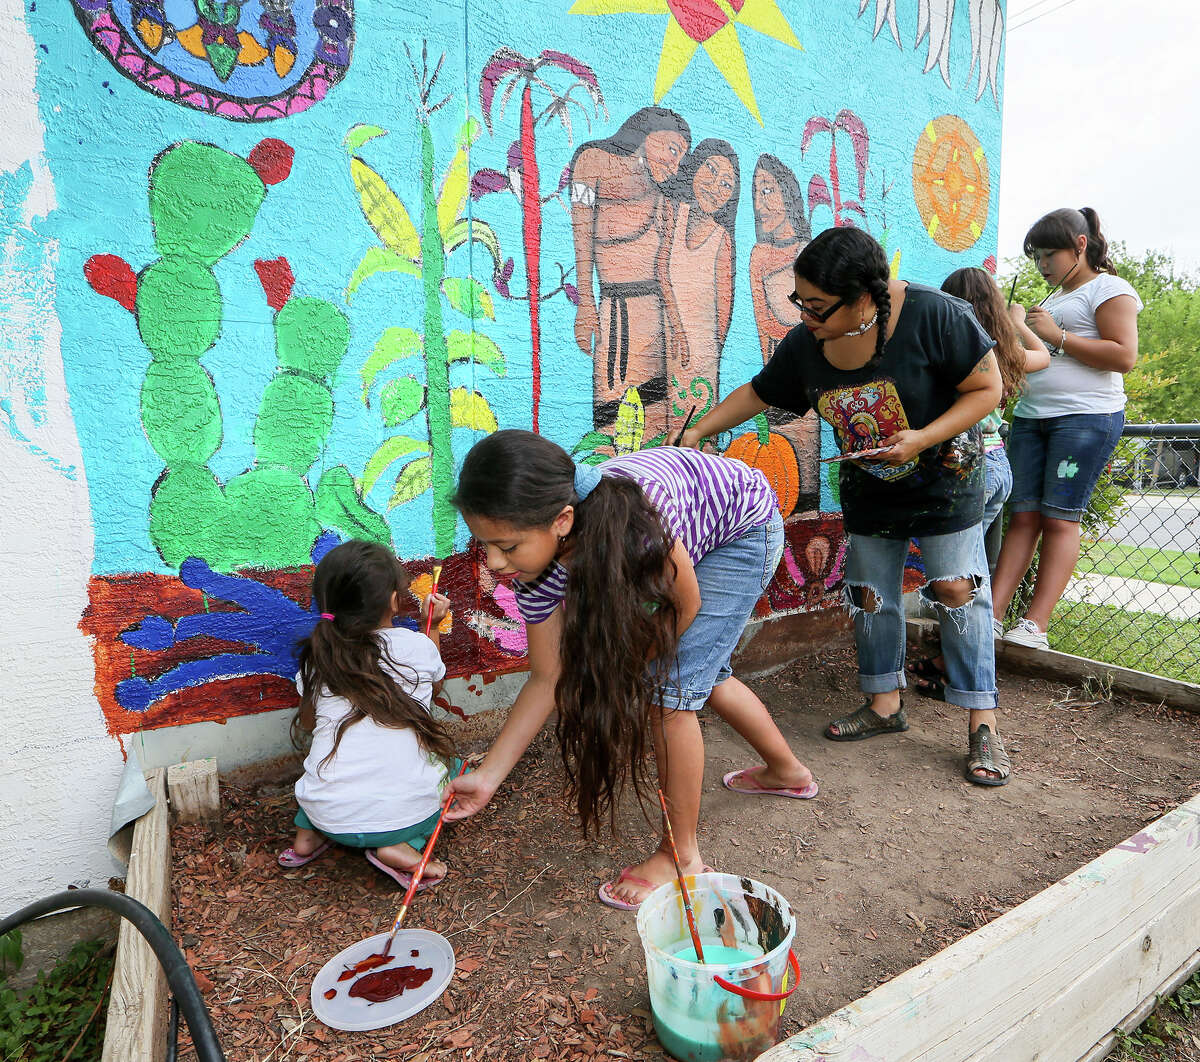 Gladys Moreno (from left), 5, Aricely Moreno, 9, Jane Madrigal, Penelope Lopez, 9, and Laila Smith, 10, paint a mural on the wall of a buidling in the Children's Jr Master Gardners program at Time Dollar, 2806 W. Salinas, on Friday, Aug. 1, 2014. MARVIN PFEIFFER/ mpfeiffer@express-news.net